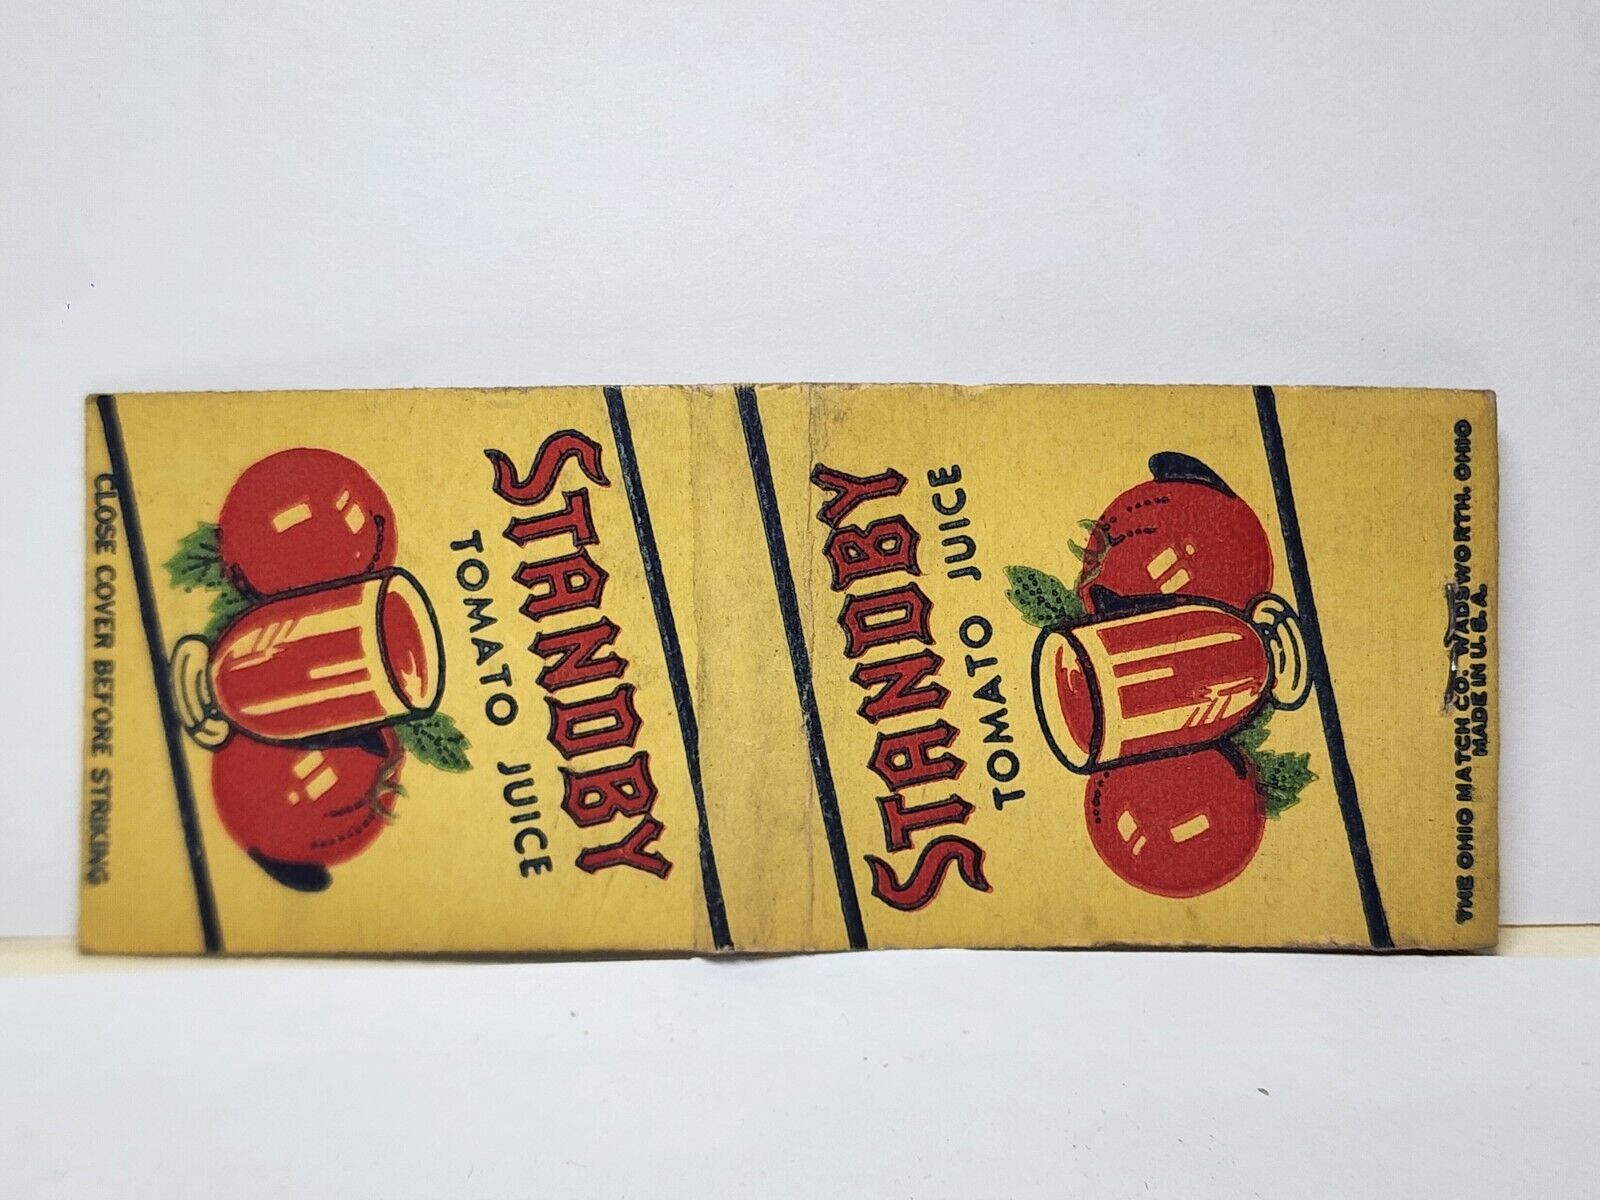 Vintage STANDBY TOMATO JUICE Advertising Beverage Food Matchbook Cover Ohio